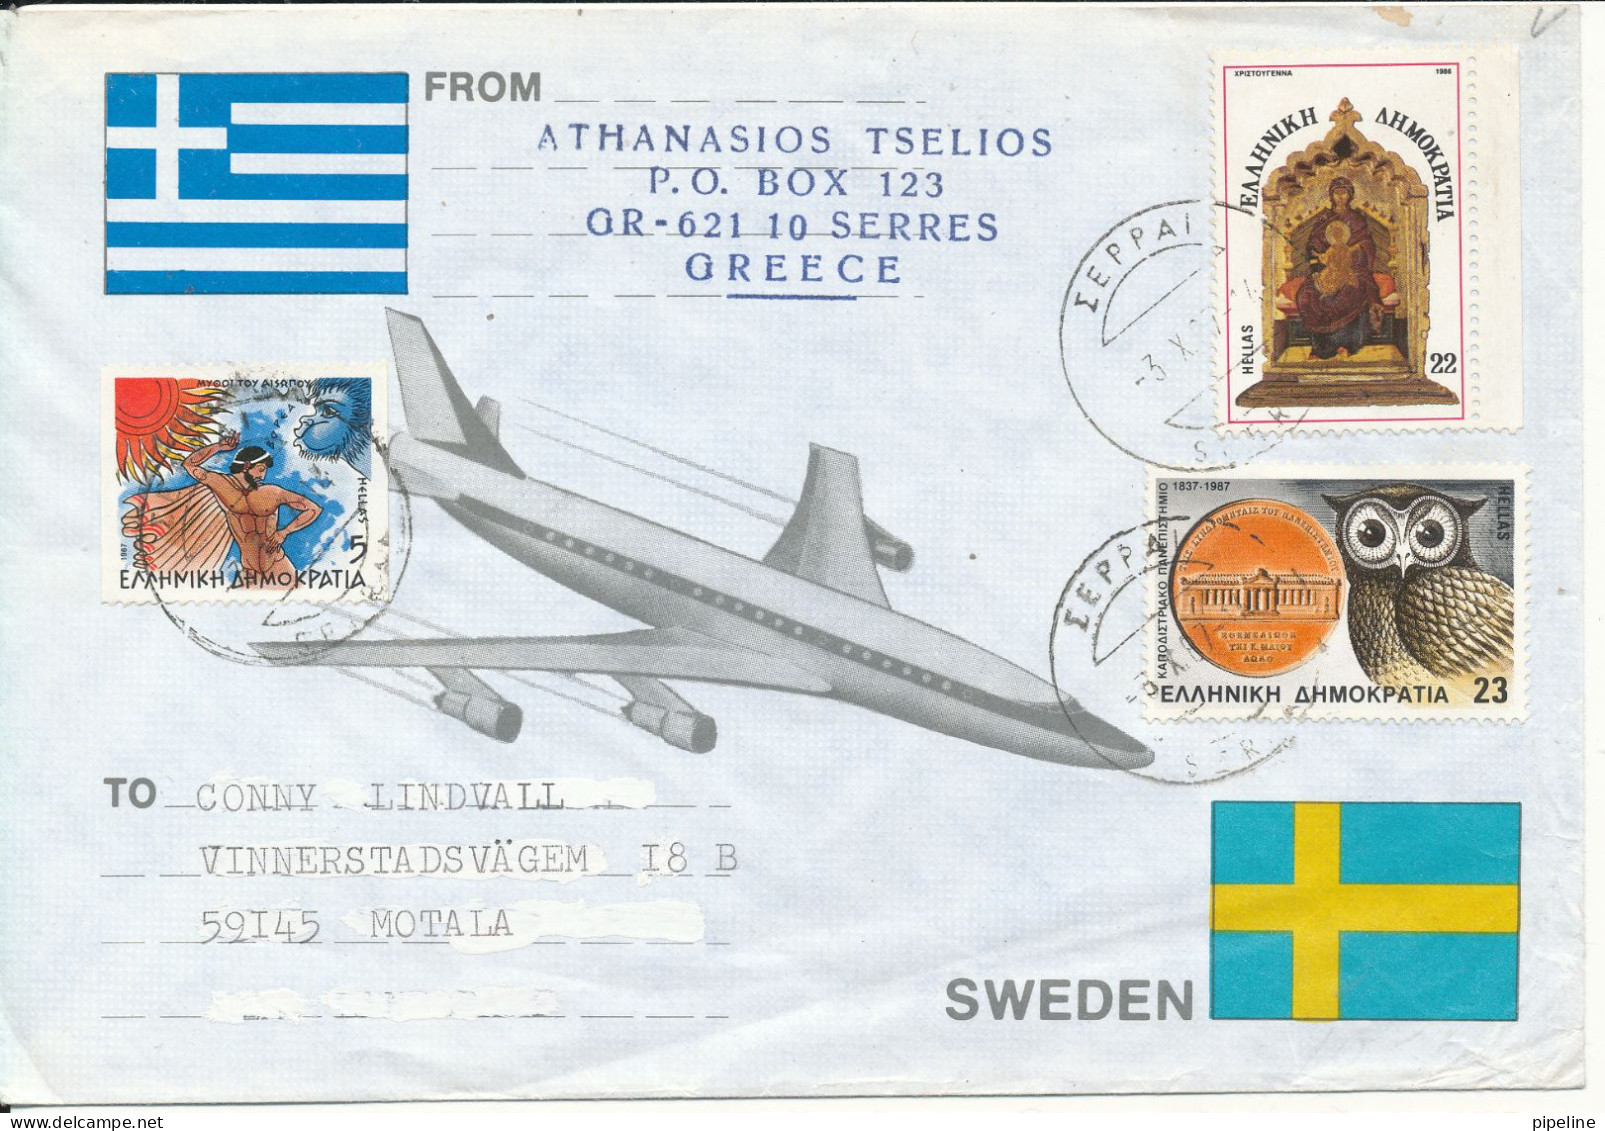 Greece Air Mail Cover Sent To Sweden 3-10-1987 See The BASKETBALL Label On The Backside Of The Cover - Athos Berg